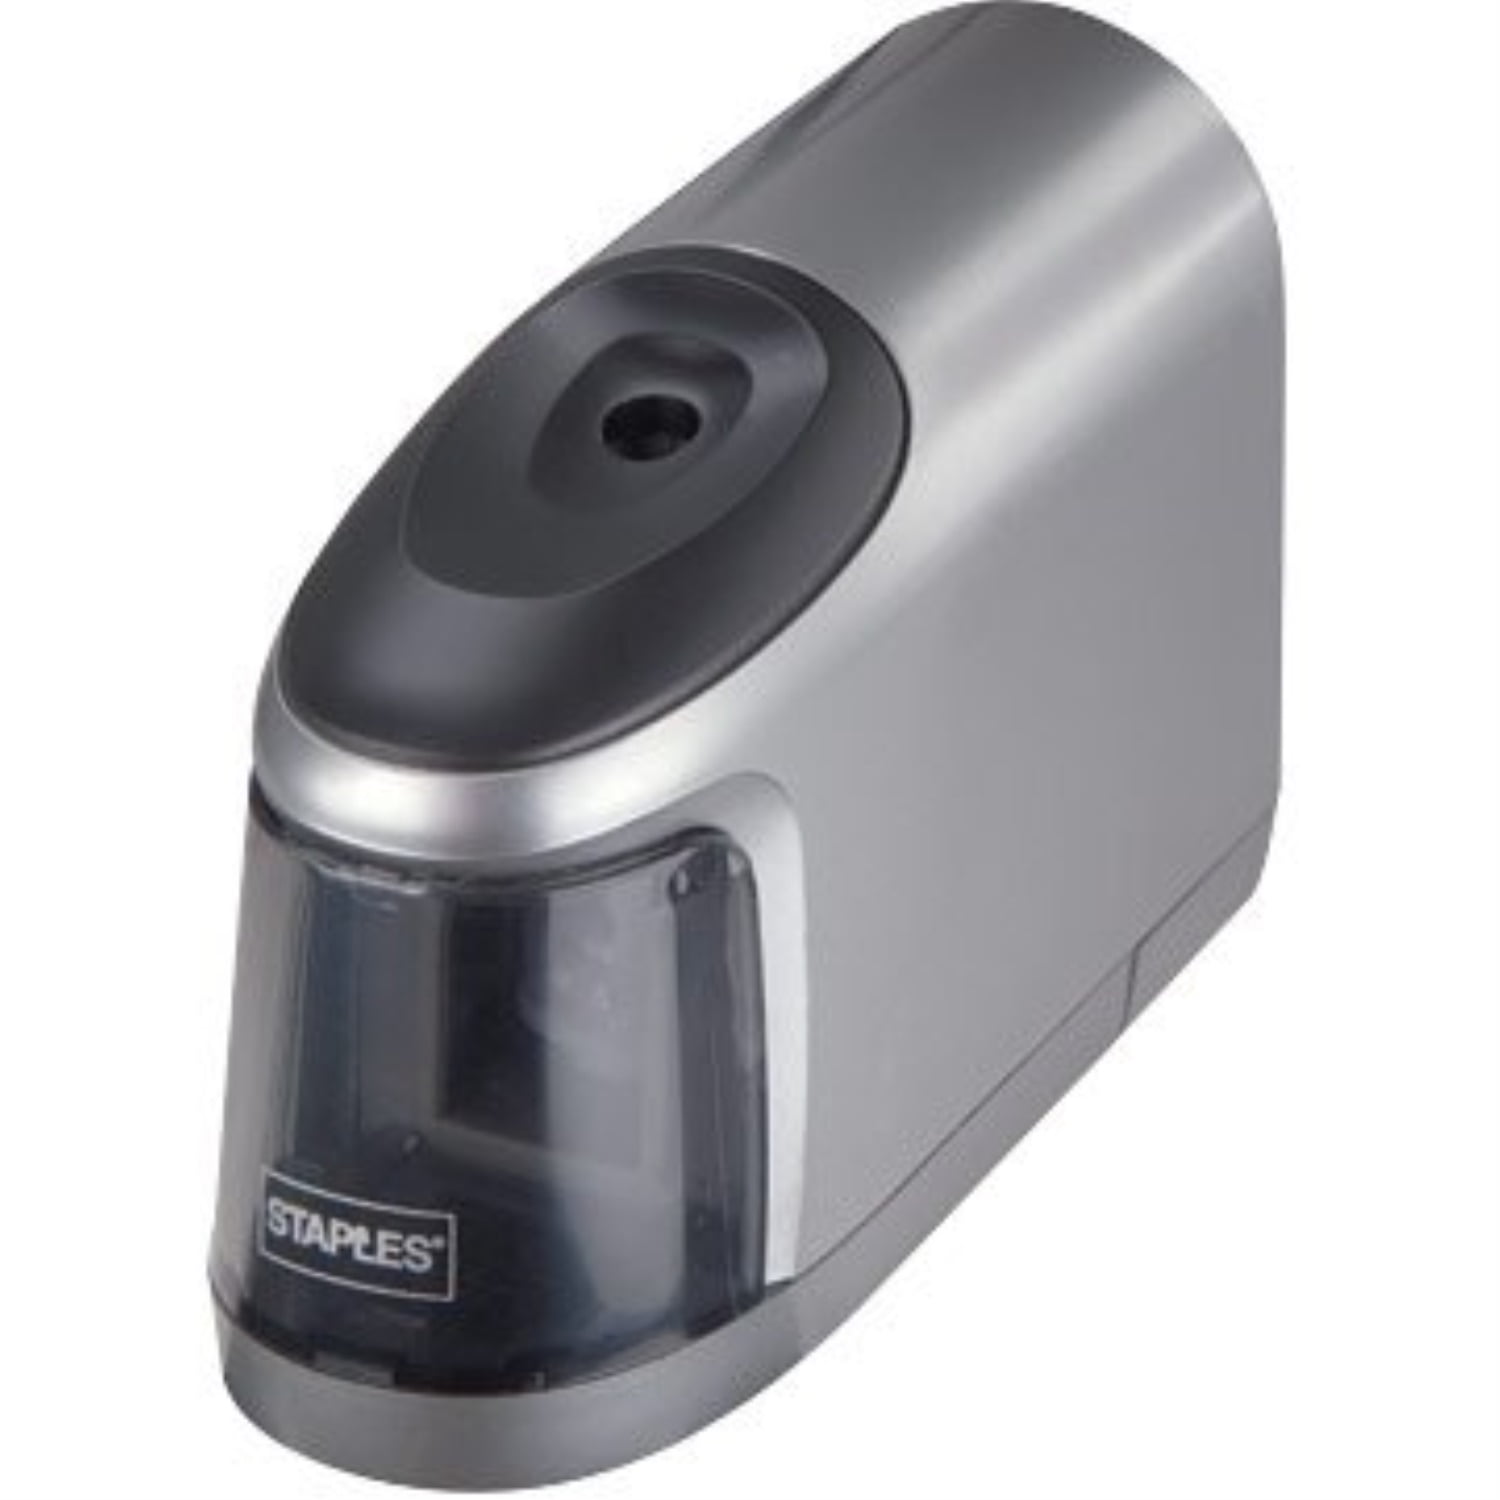 battery-operated pencil sharpener 